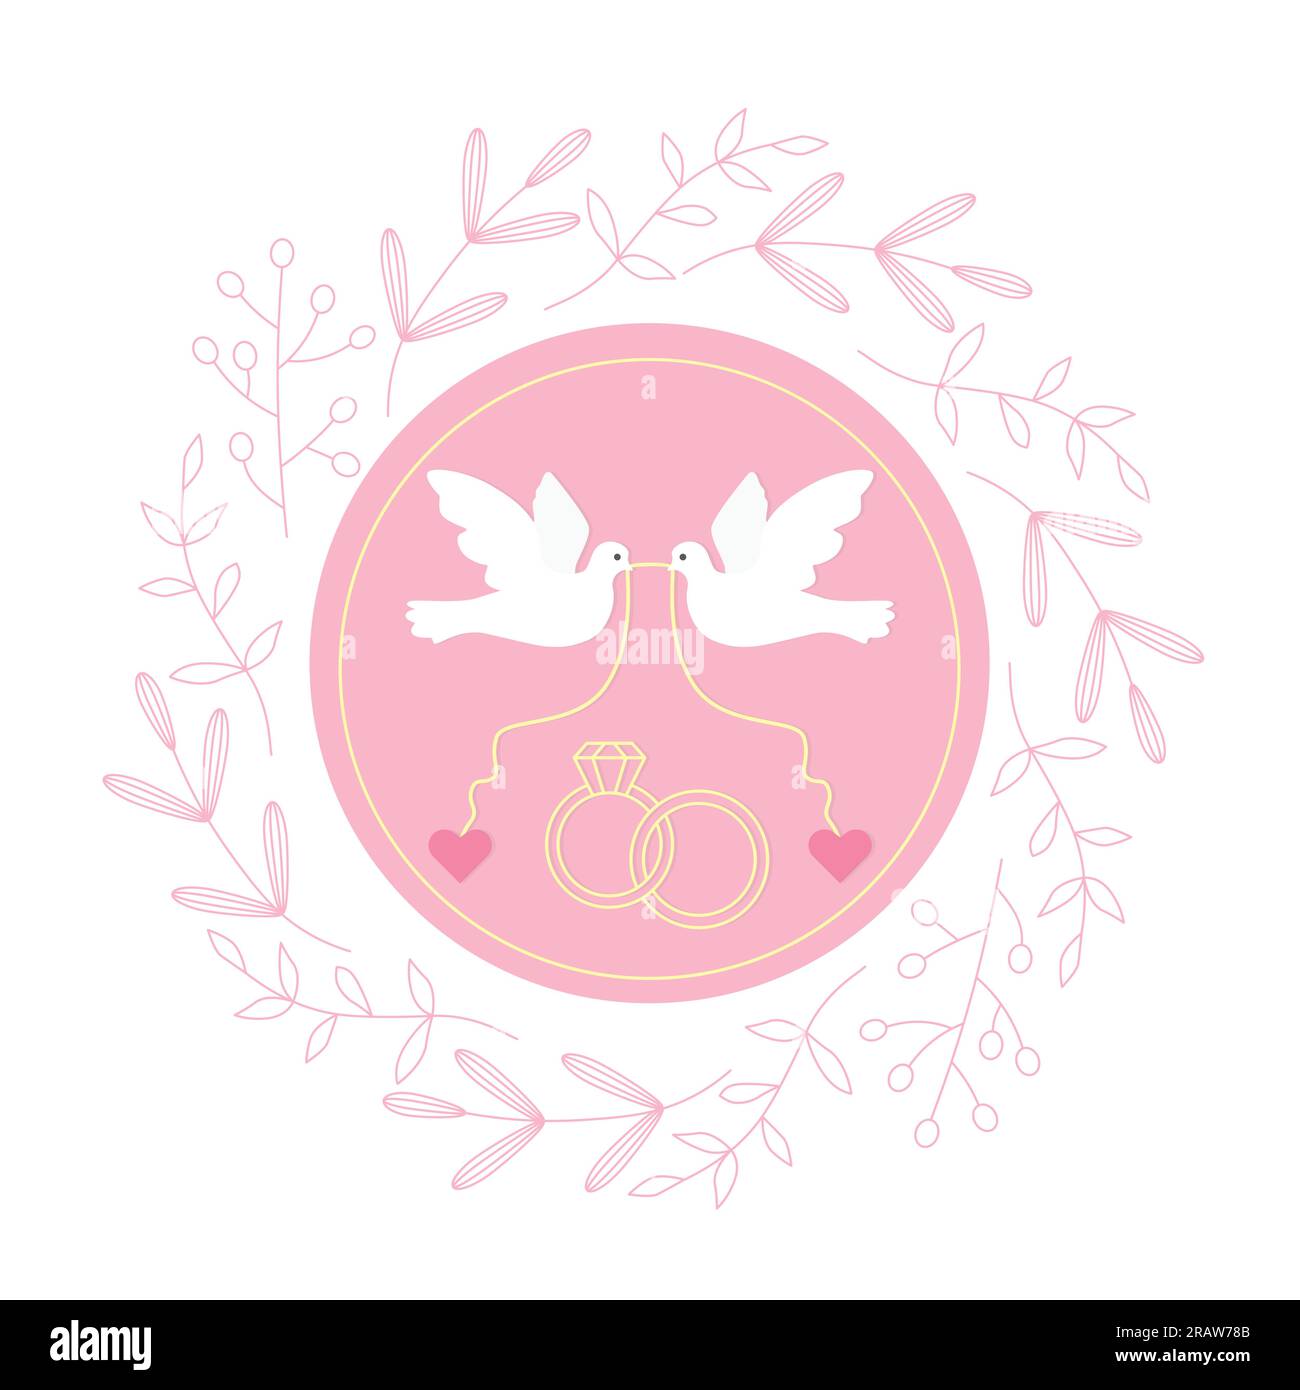 wedding invitation design template with two doves, rings and floral wreath-vector illustration Stock Vector